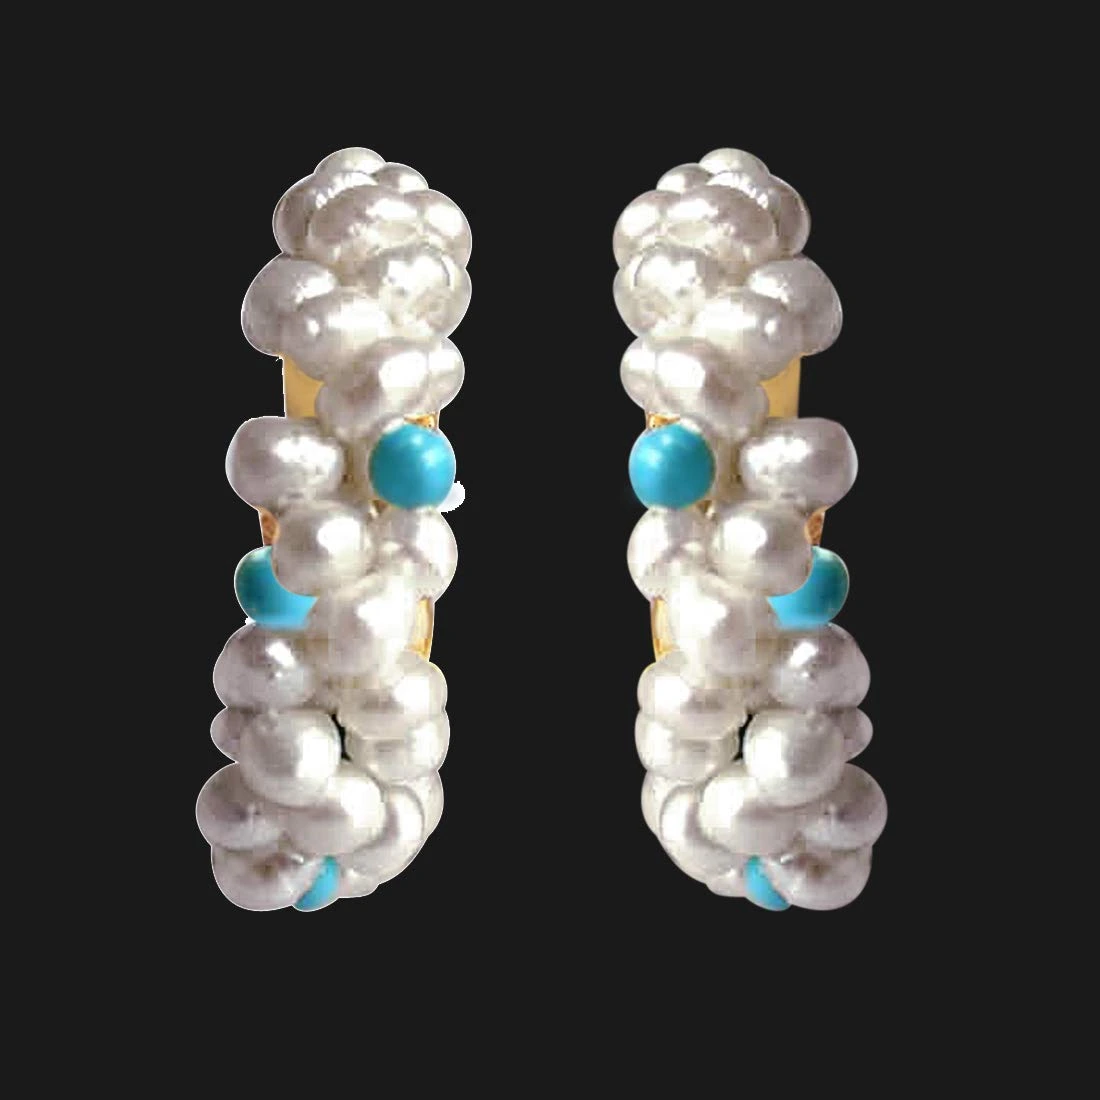 Graceful Girl - Freshwater Pearl, Turquoise Beads & Gold Plated Bali Earrings for Women (SE29)